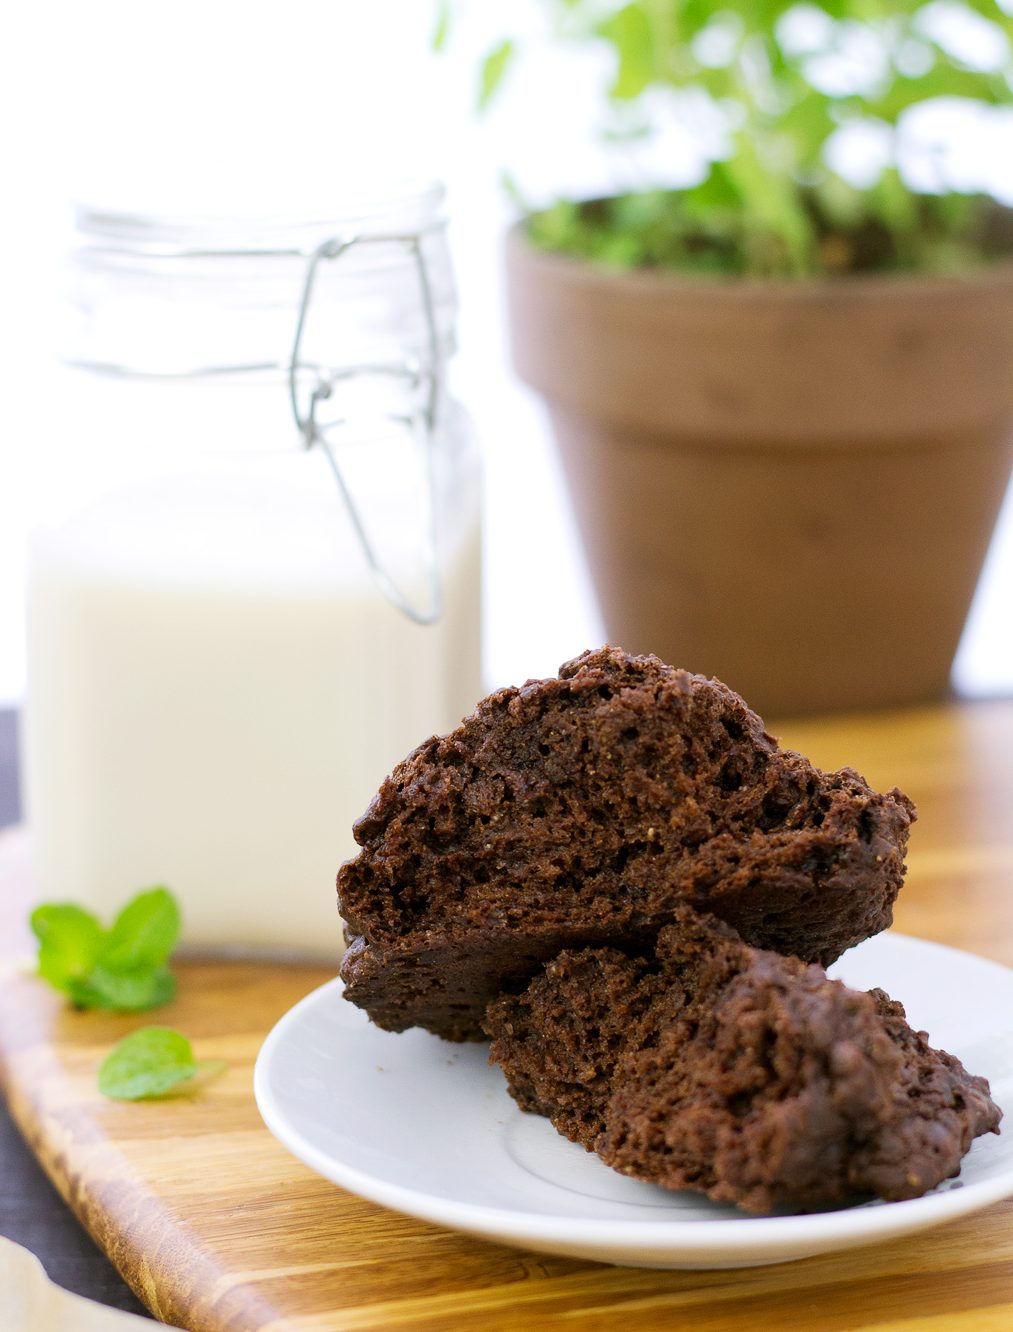 Easy vegan chocolate mint scone broken open to show a delicious and moist inside!